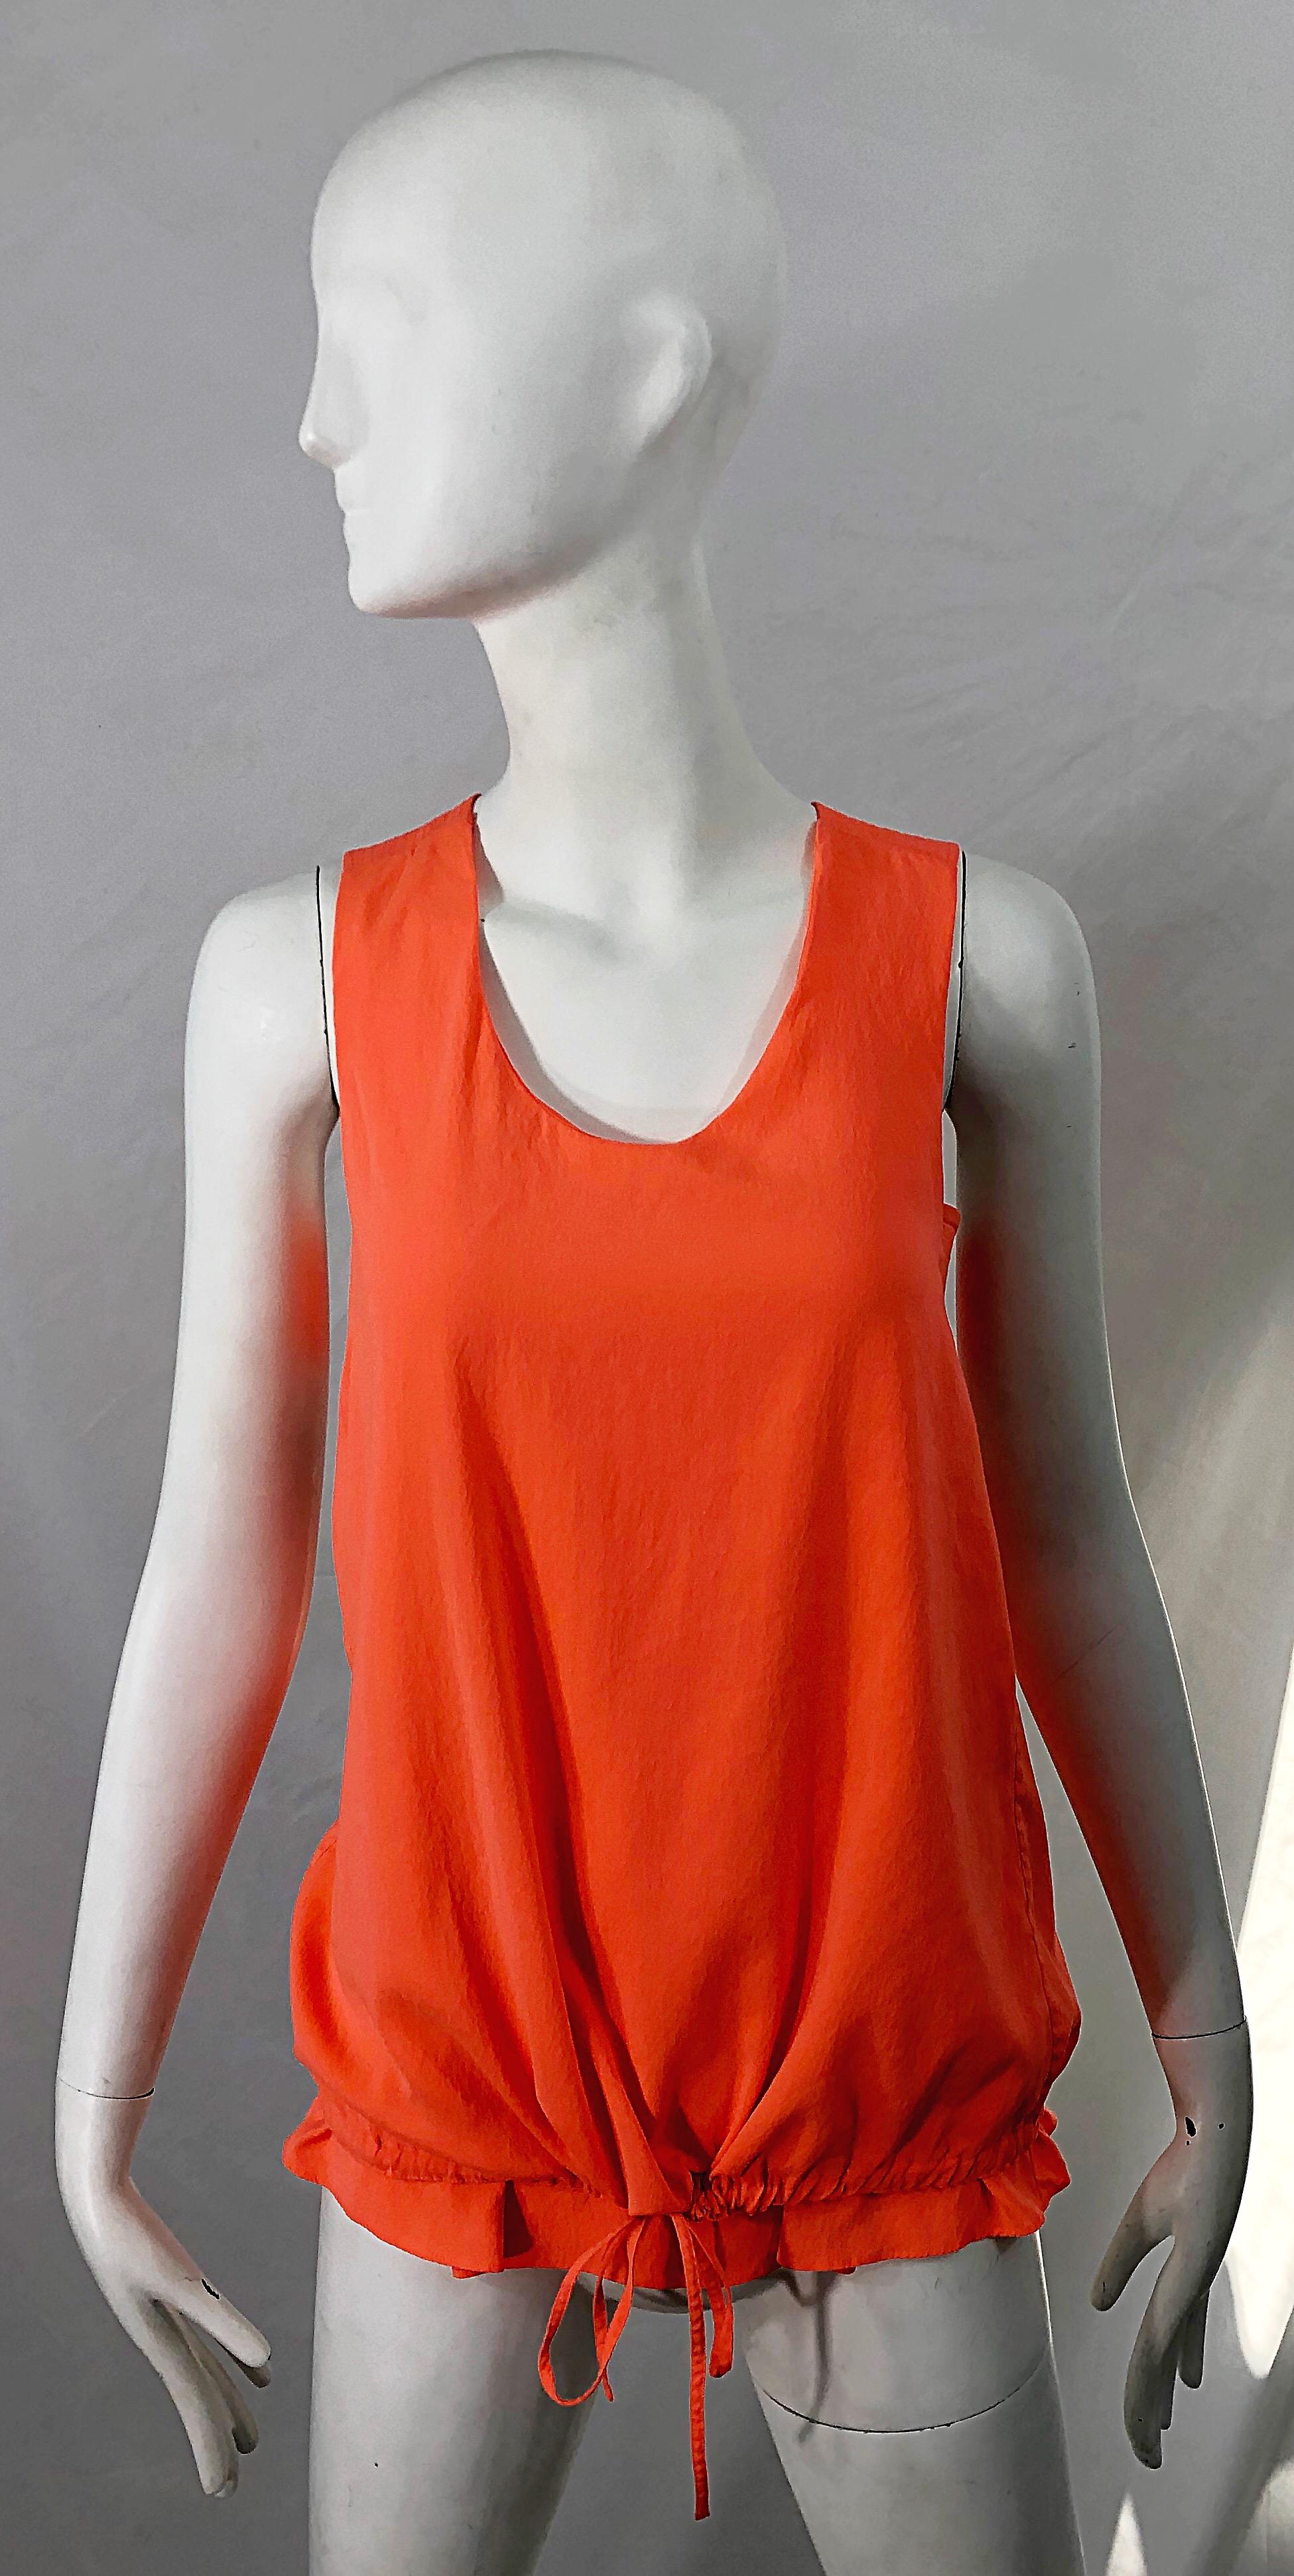 Beautiful CHLOE by CLARE WAIGHT KELLER ' Orange Fizz ' silk sleeveless shirt ! Features a vibrant color of orange on a luxurious silk (92%) and elastane (8%) fabric. Racerback style with bands at each sleeve opening. Drawstring at center waist can